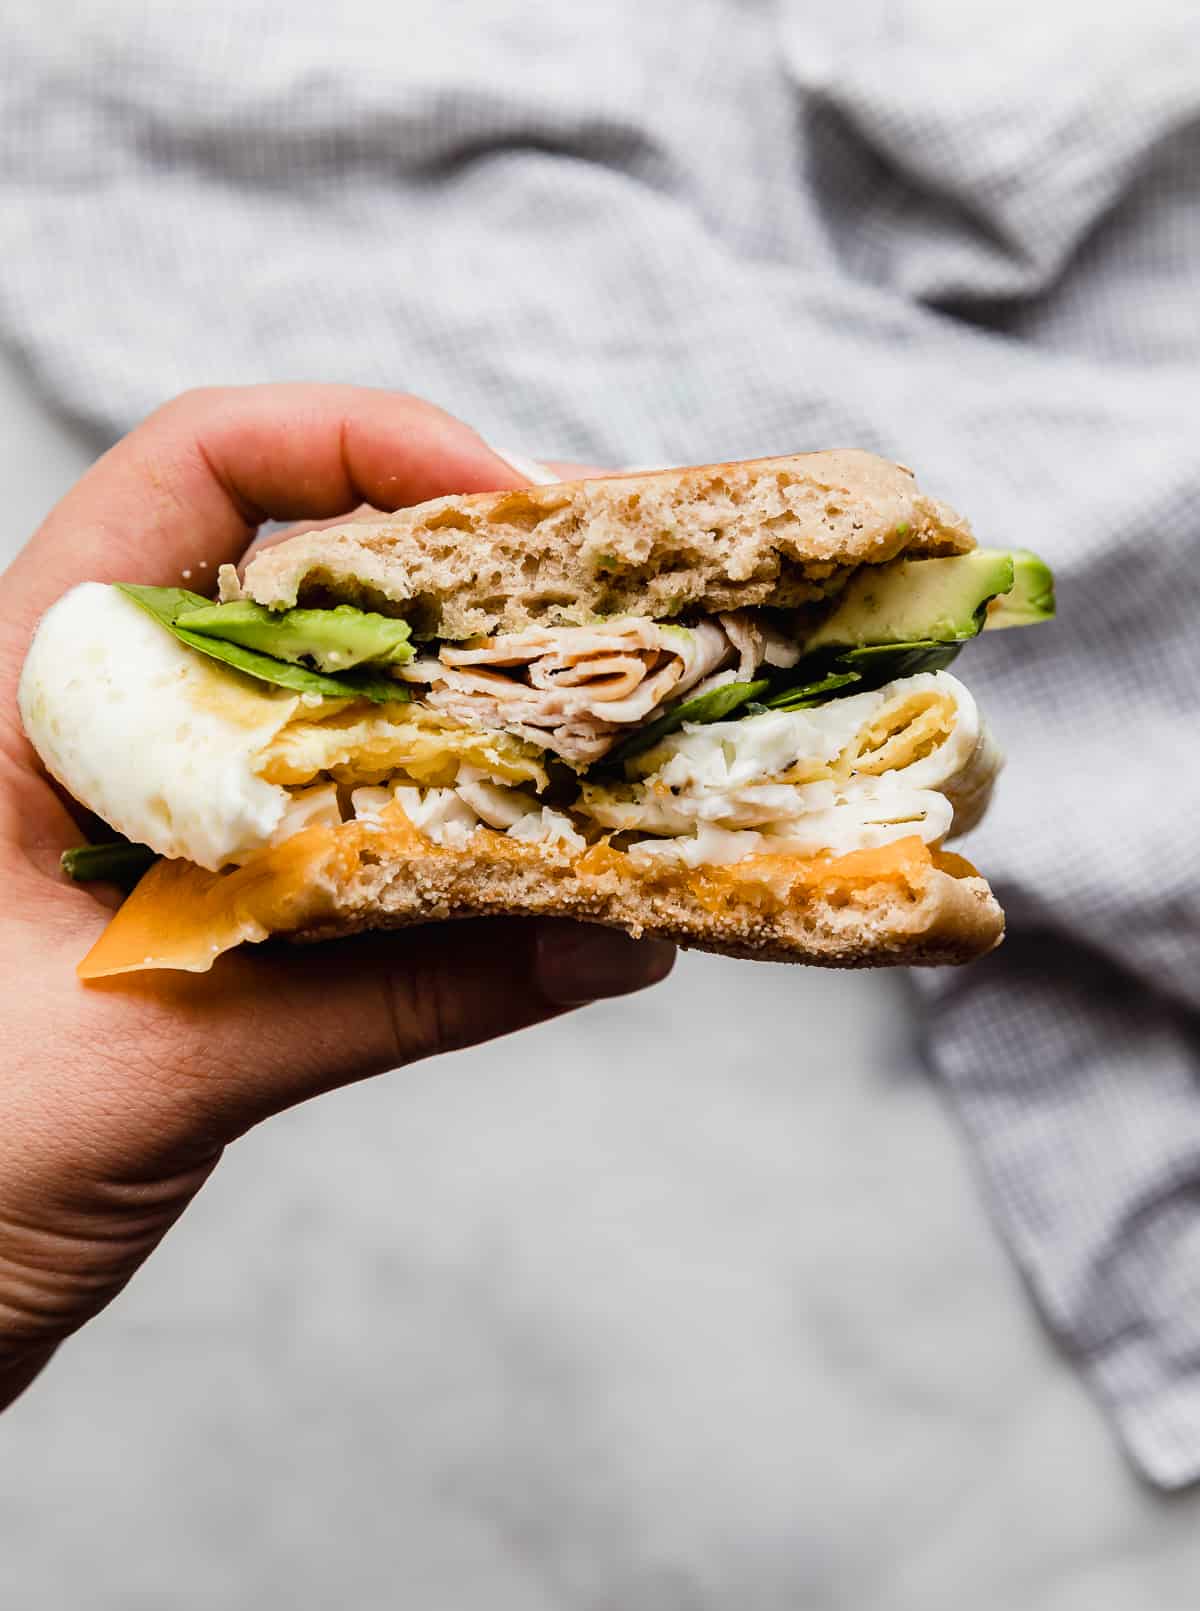 A hand holding a Turkey Breakfast Sandwich on an English muffin topped with avocado, spinach, turkey, eggs, and cheese.